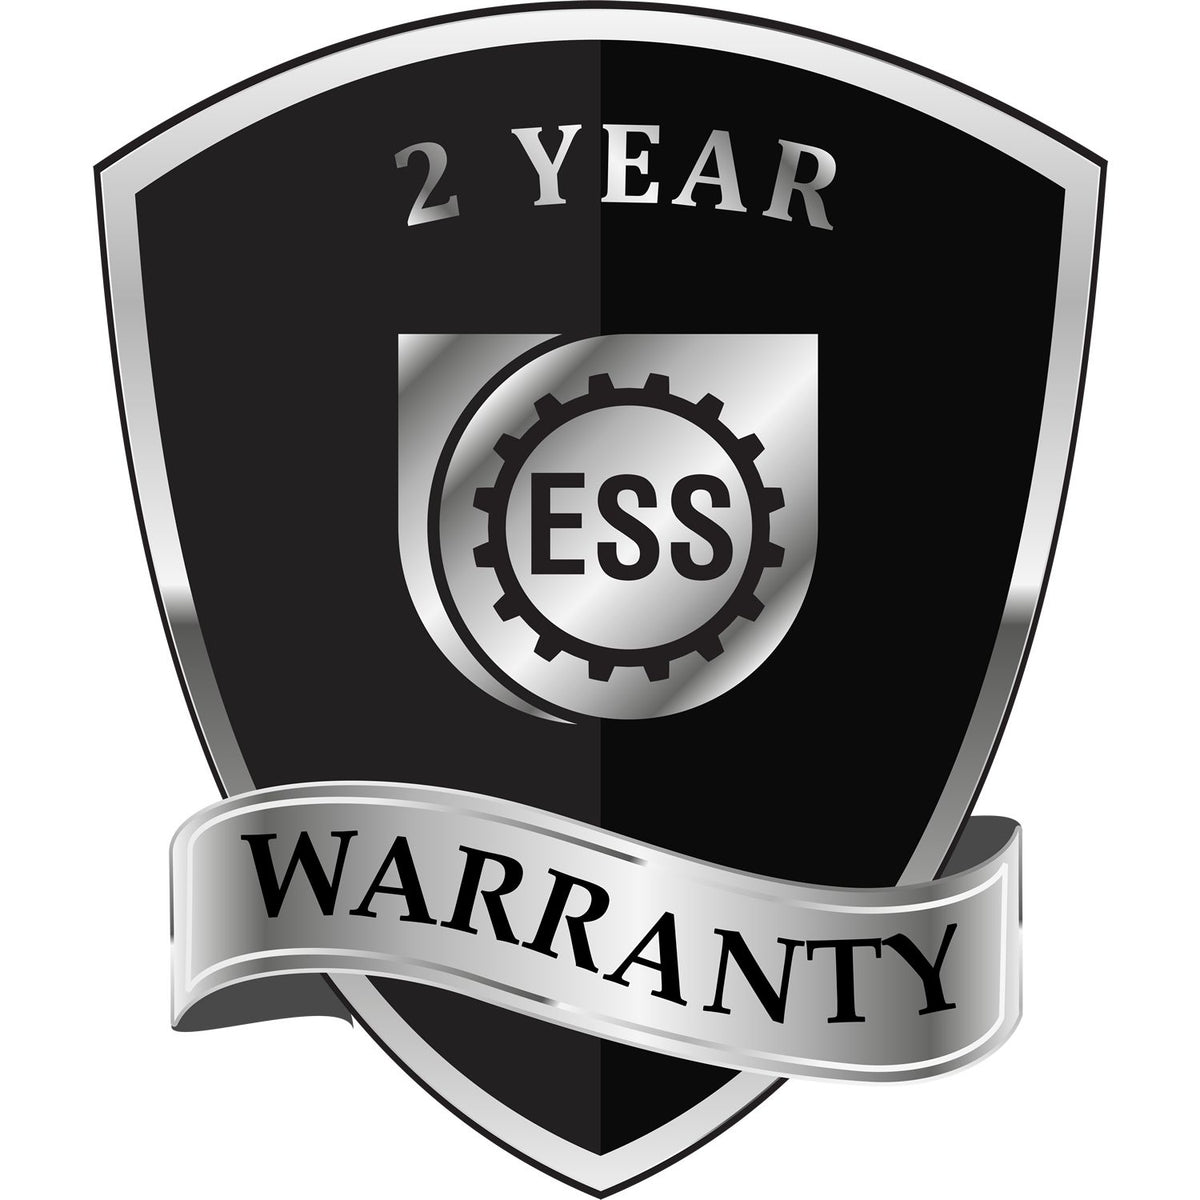 A badge or emblem showing a warranty icon for the Long Reach Kansas Land Surveyor Seal